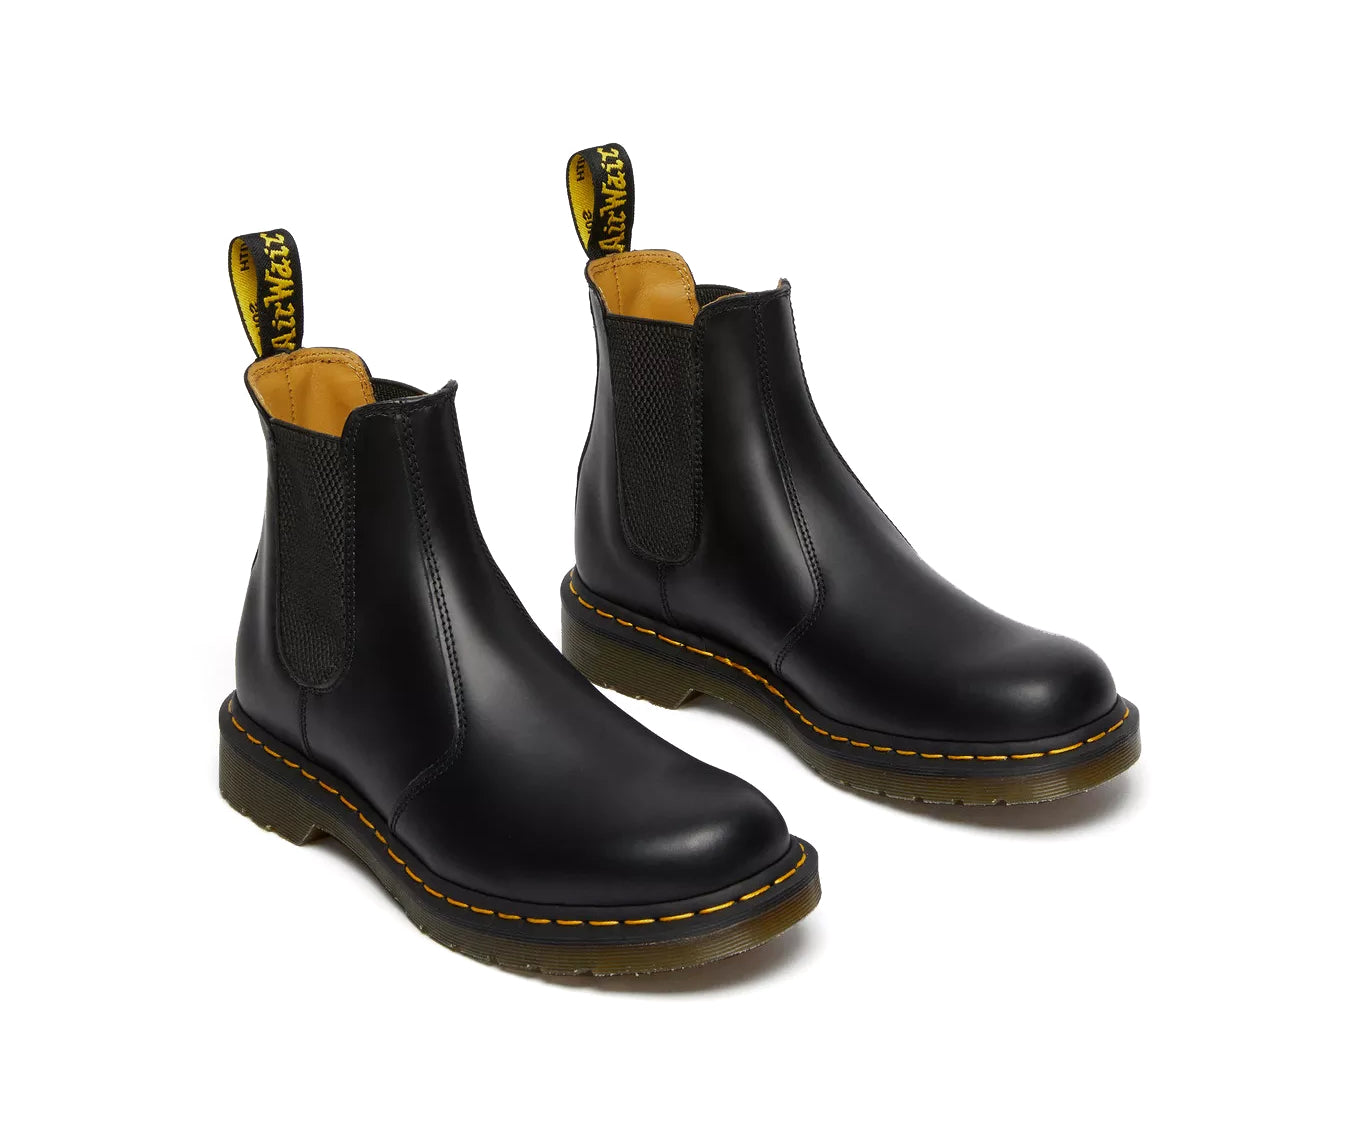 A pair of mid-ankle Dr. Martens black leather chelsea boots.